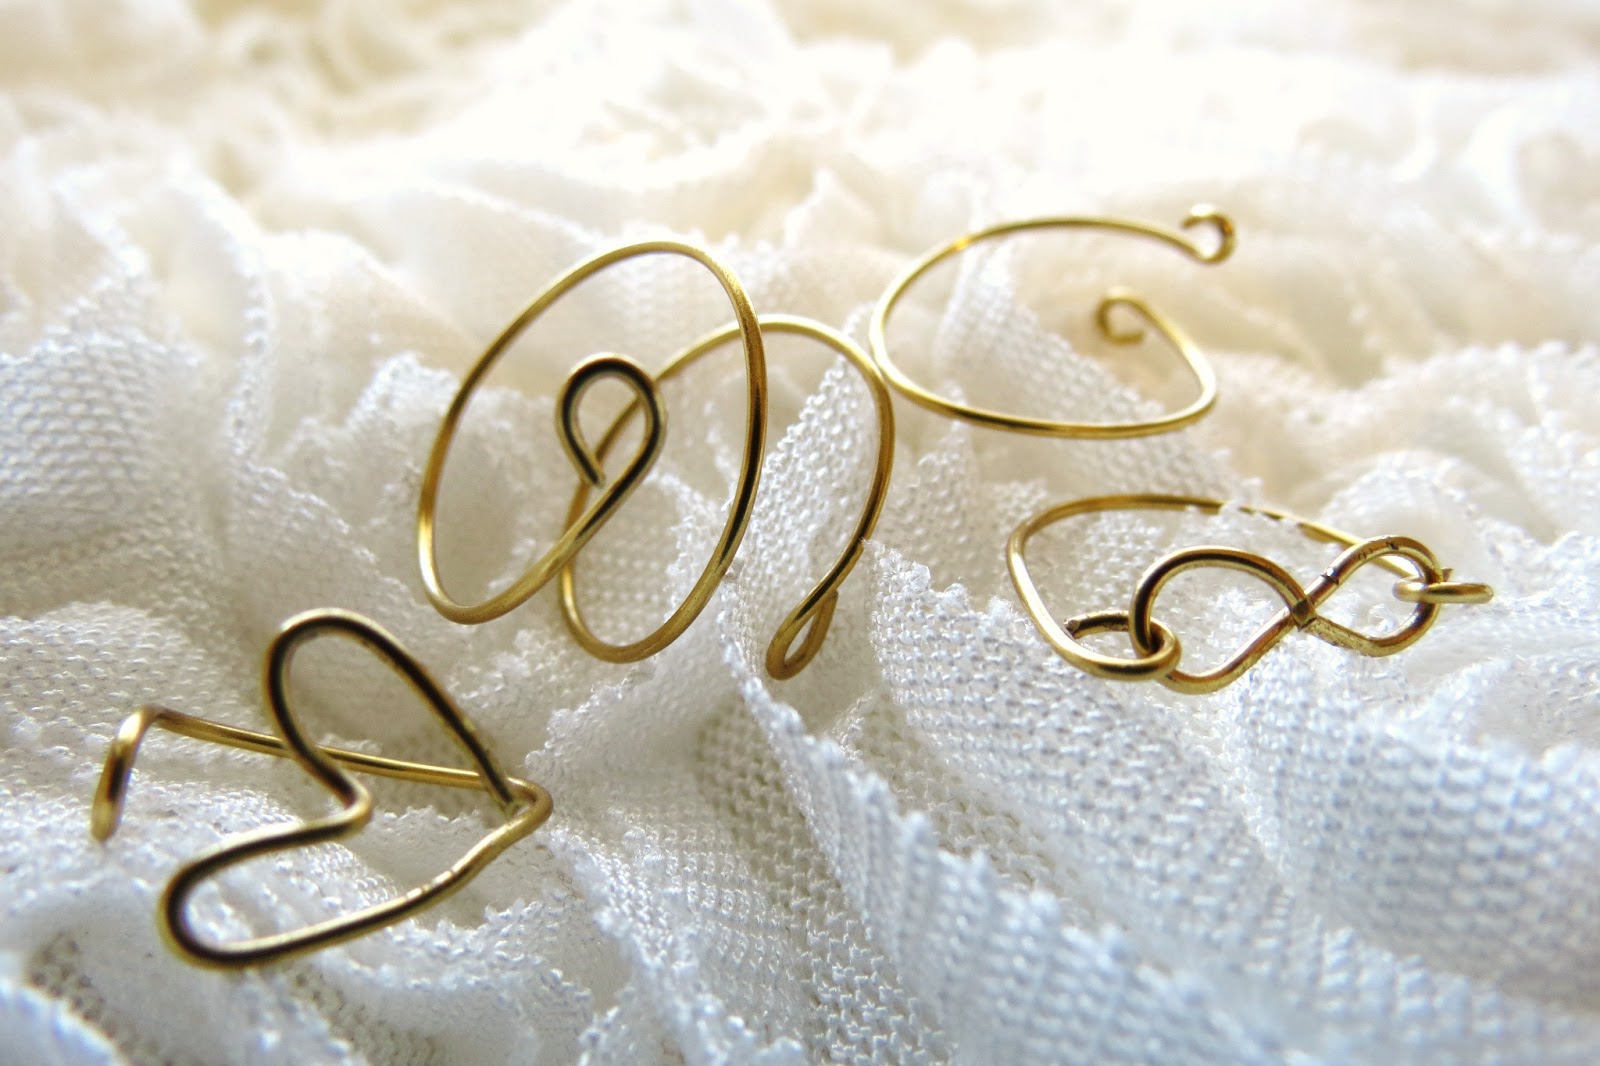 Pretty wire spiral rings